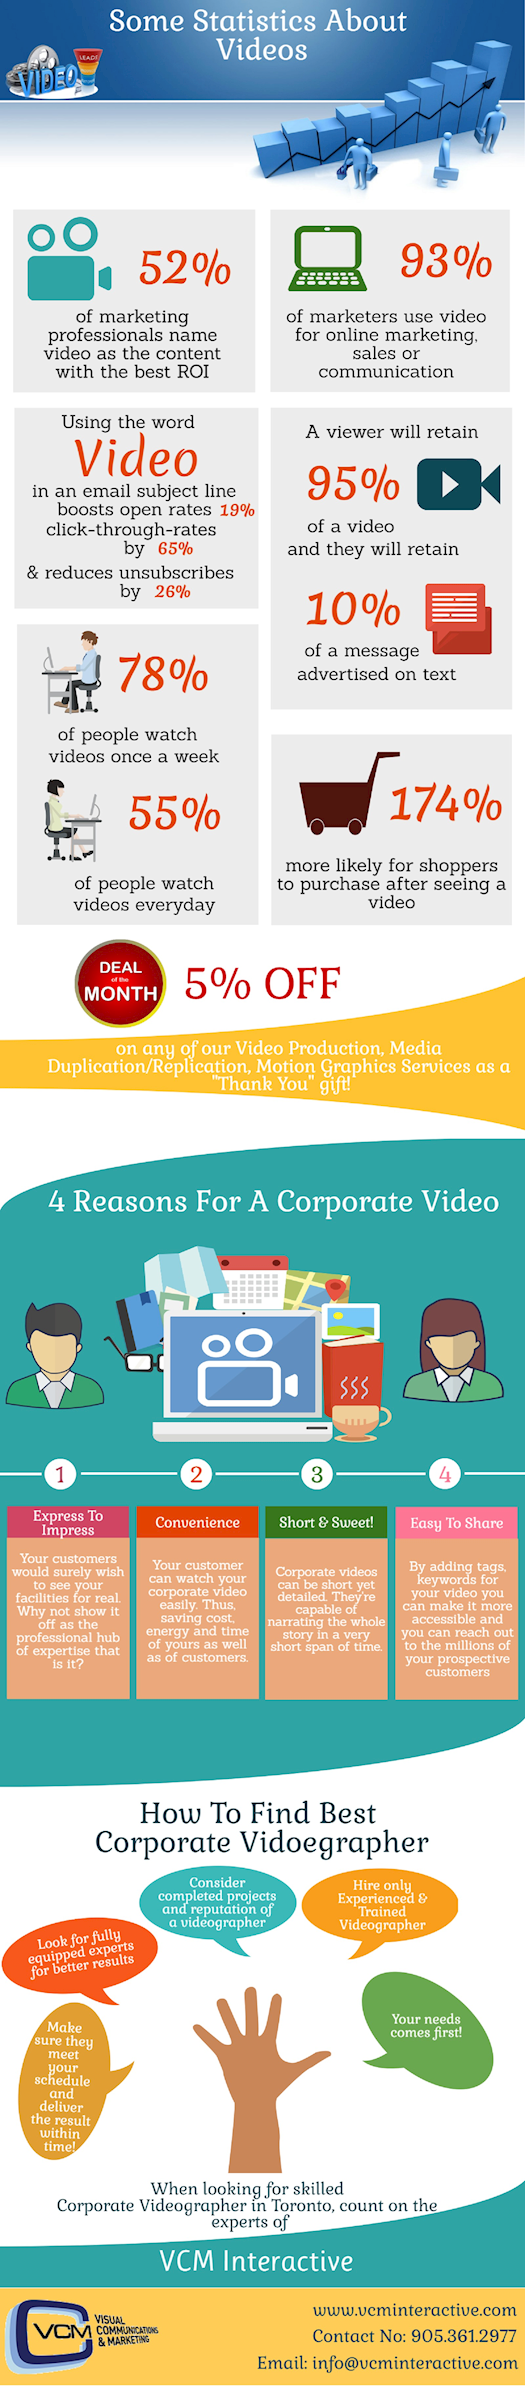 Why Corporate Video & How To Find The Best?				